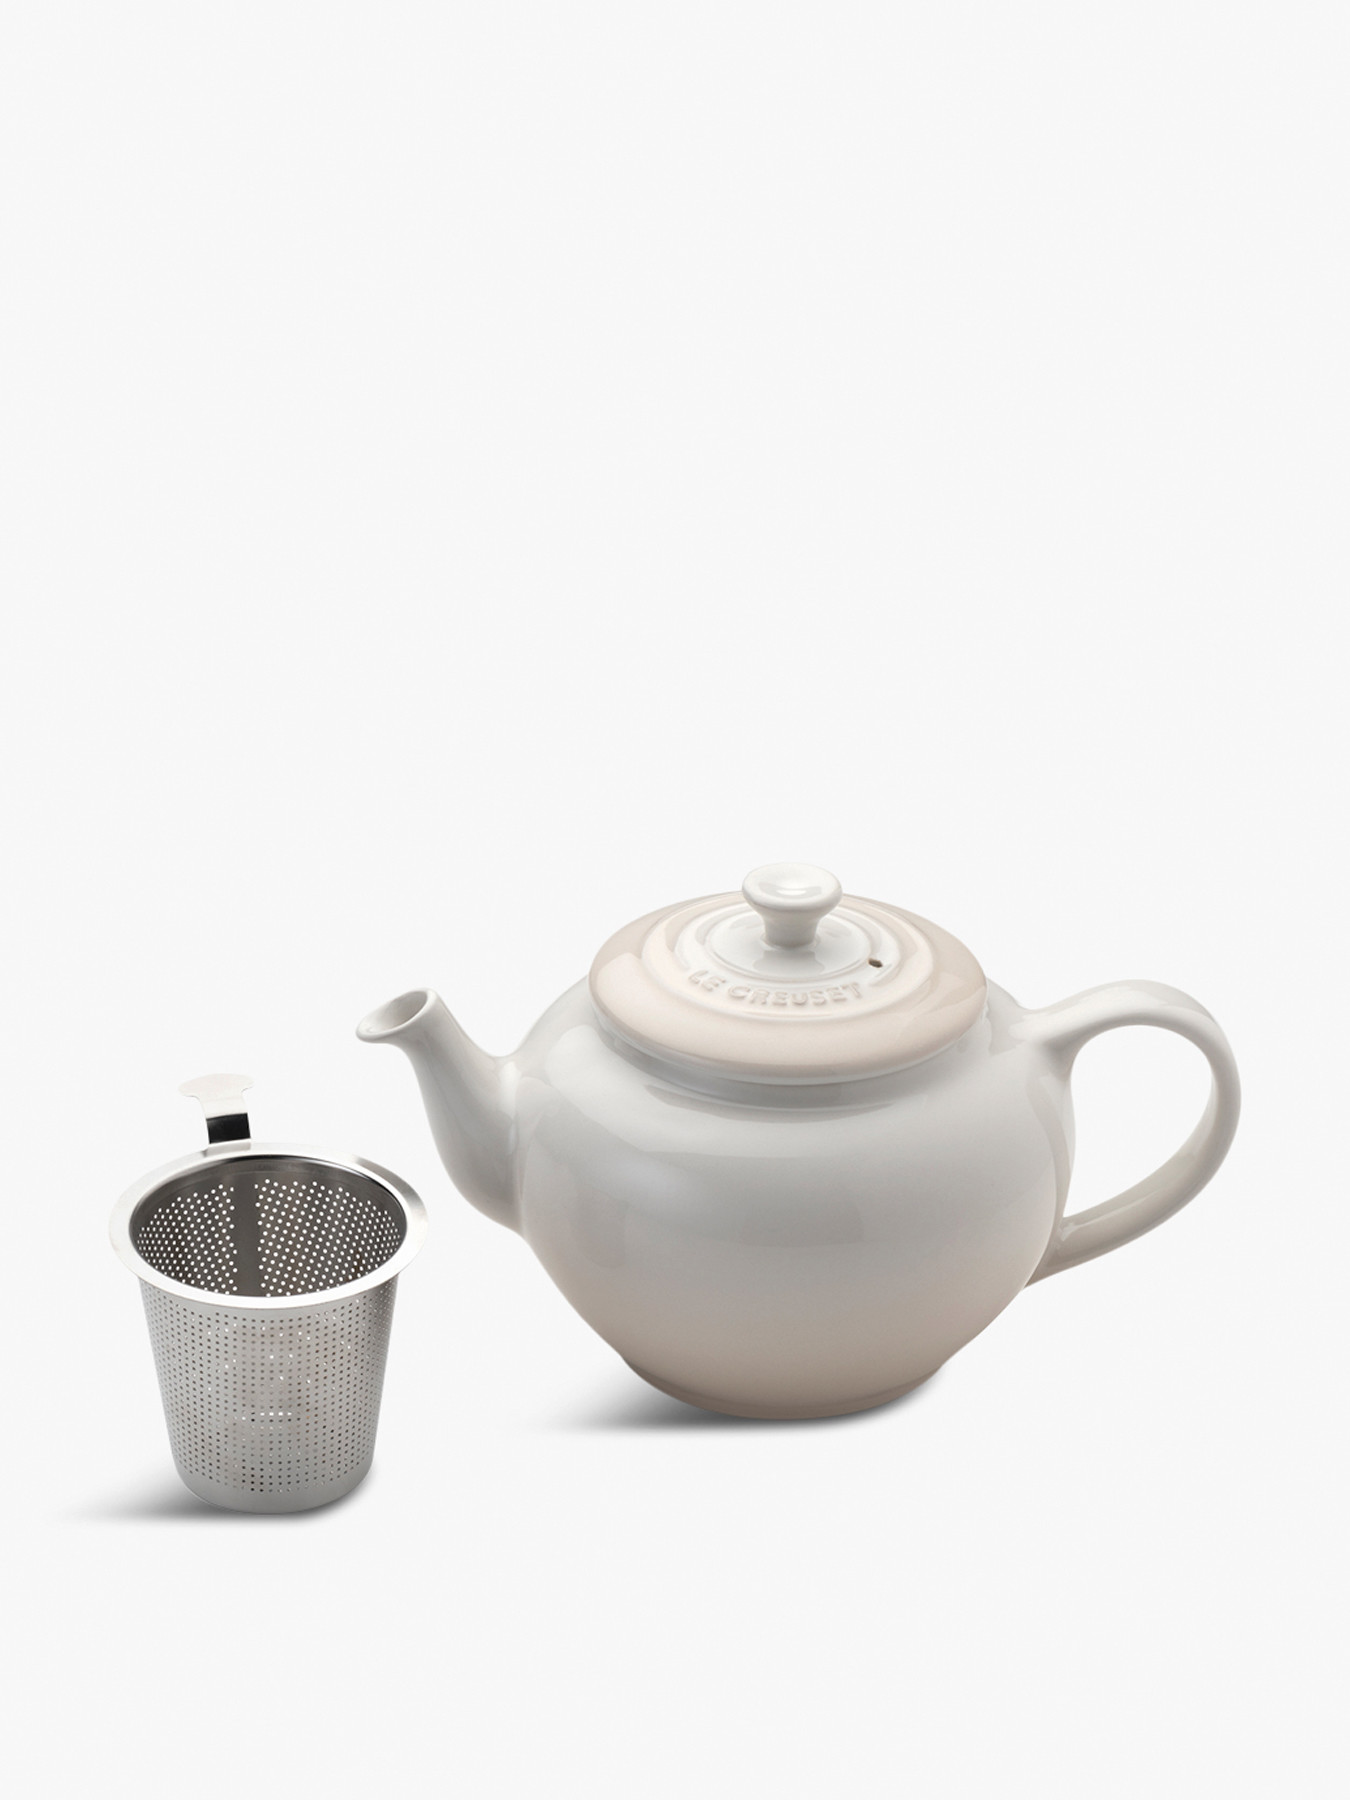 Petite Teapot with Infuser